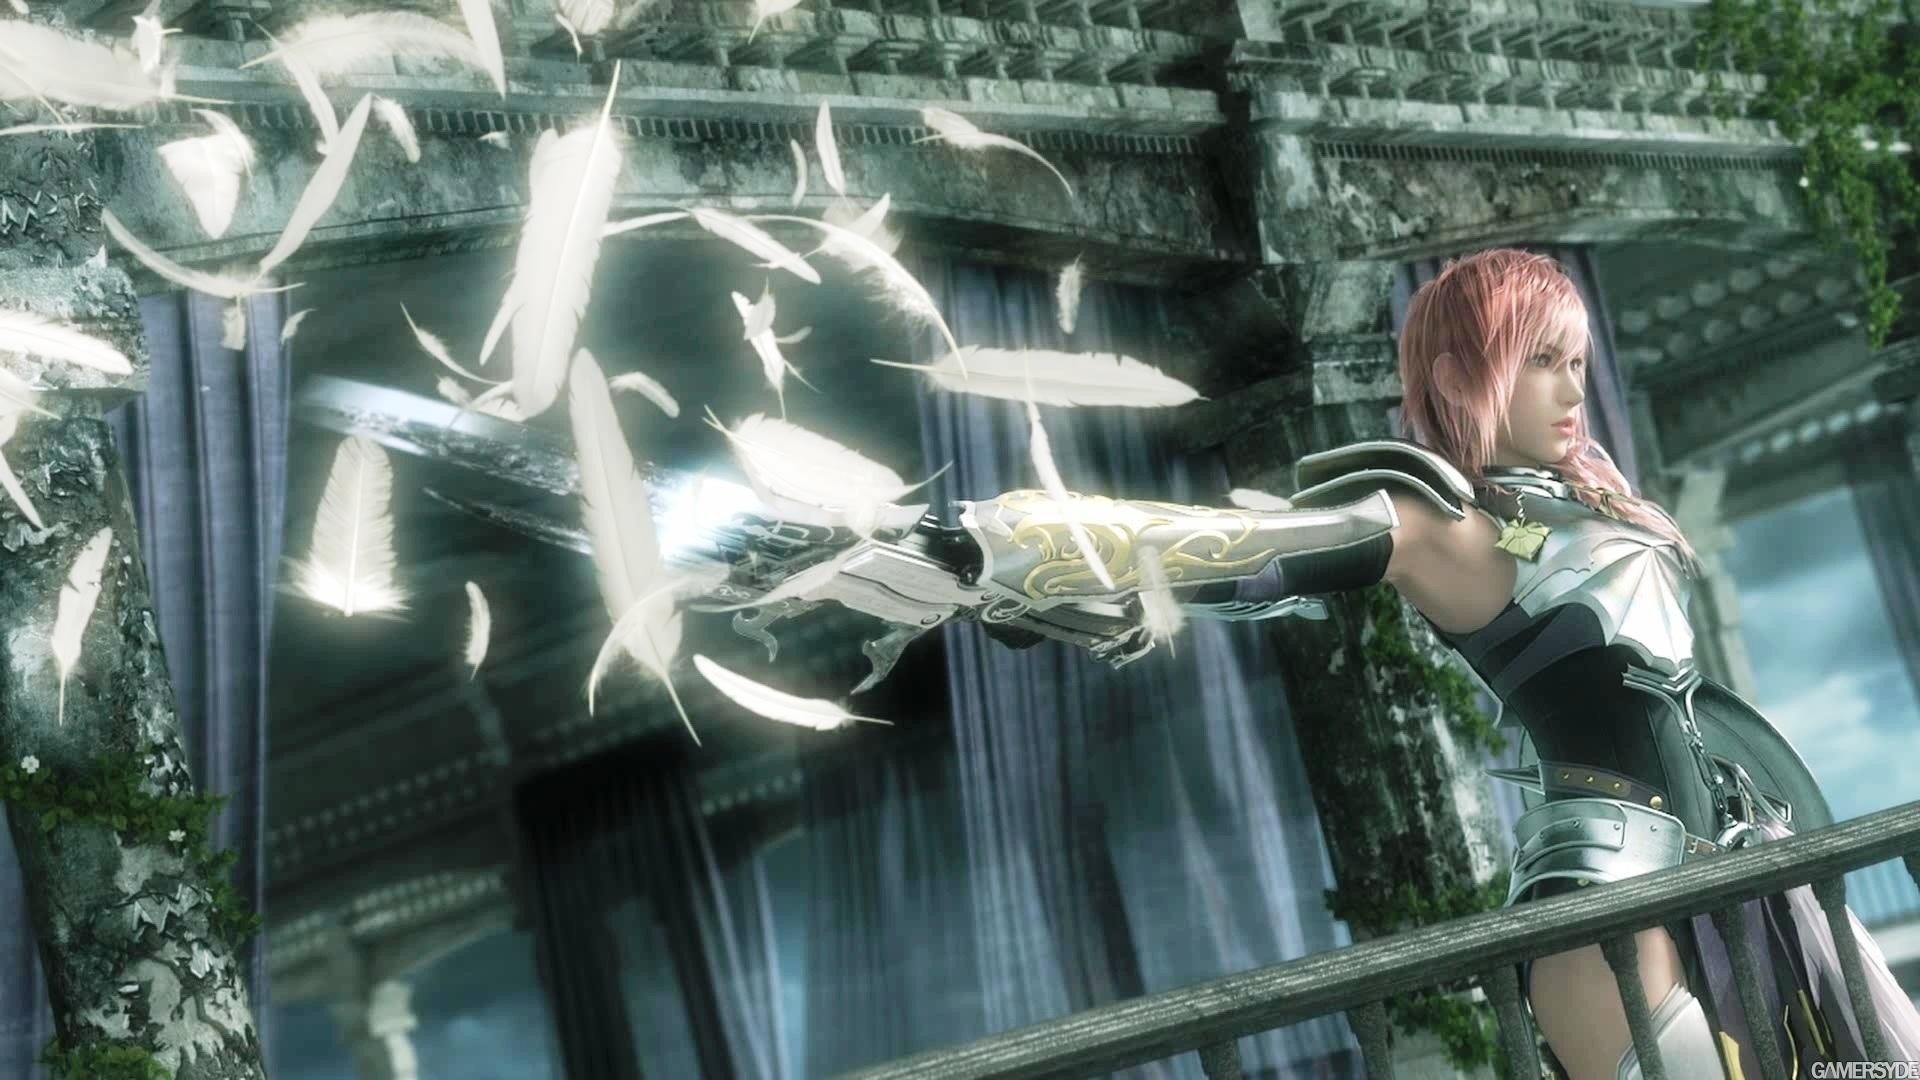 Final Fantasy Xiii Wallpaper 1080p 81 Pictures